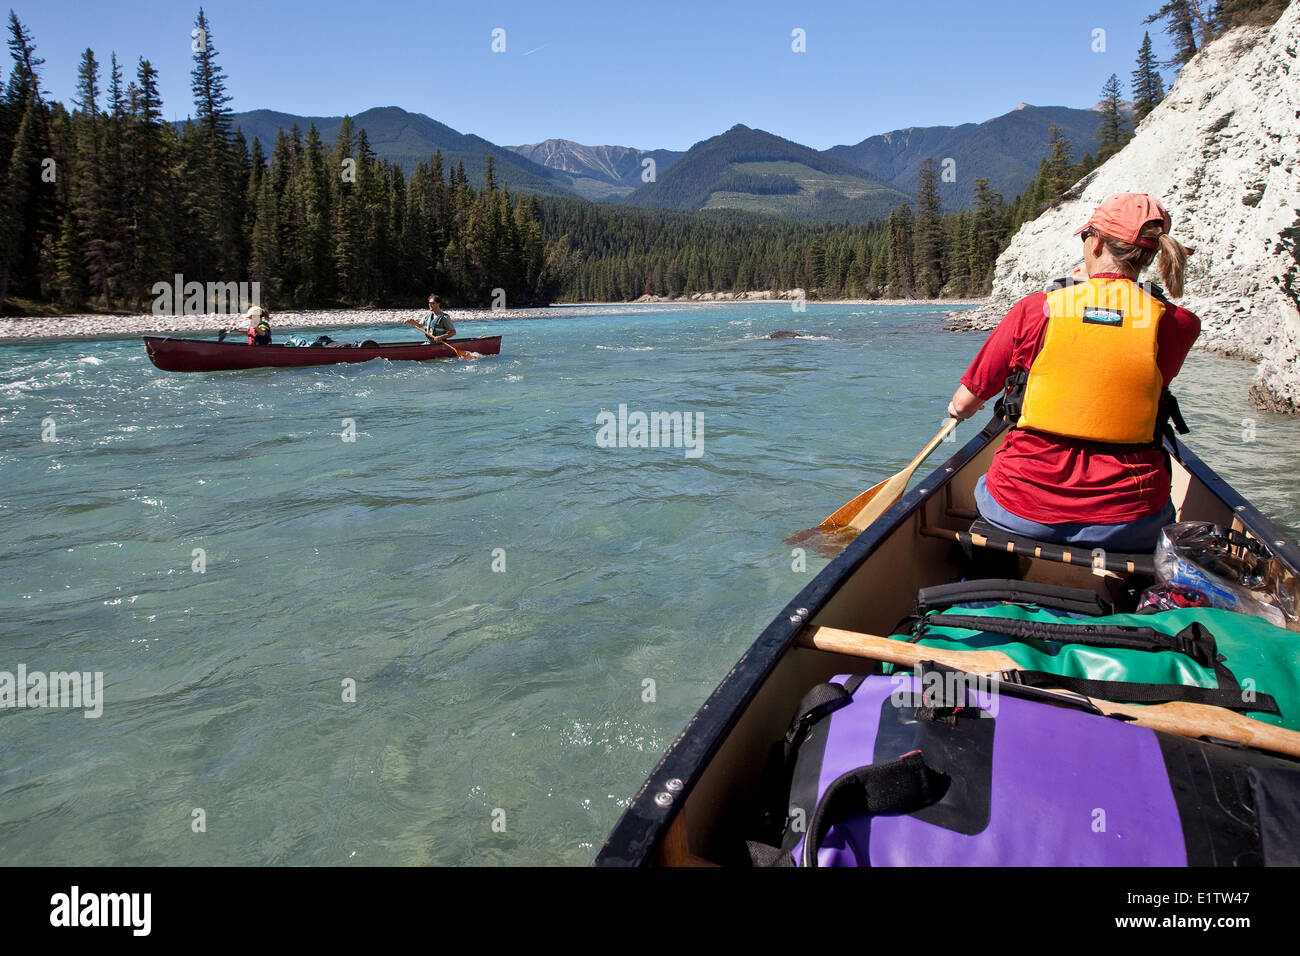 Several families enjoy river trip in canoes and one raft on Kootenay River, Kootenay National Park, BC, Canada. Stock Photo